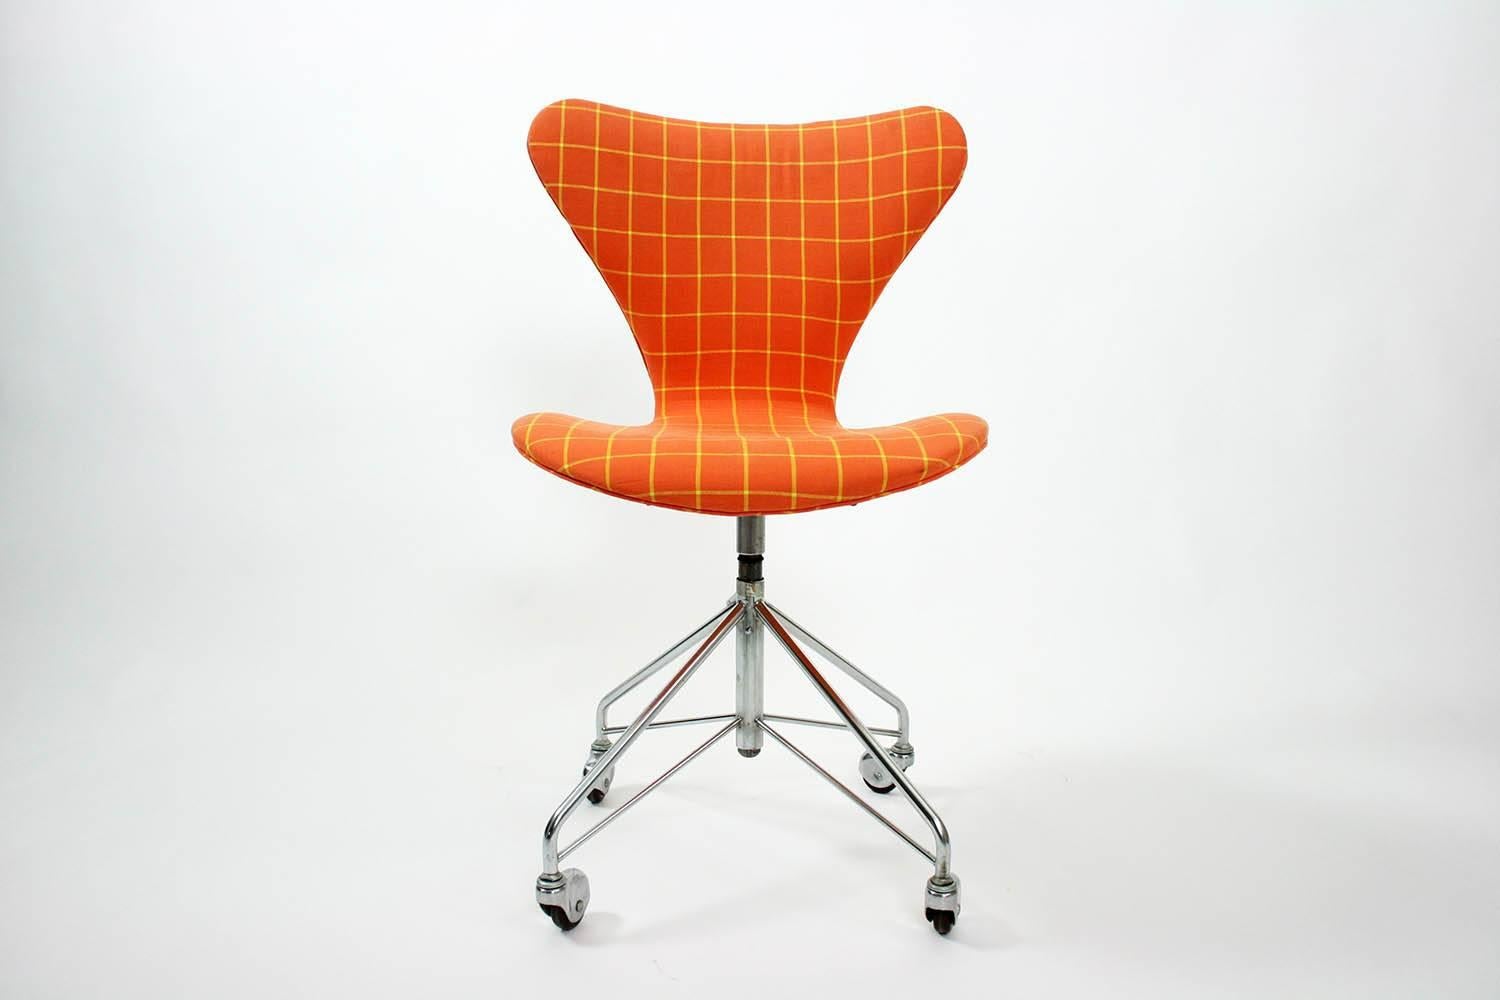 Arne Jacobsen swag base Sevener desk chair for Fritz Hansen in great original condition. Wheels roll smoothly and it looks great.

Dimensions: 19 W x 20 D x 30 H in.
 